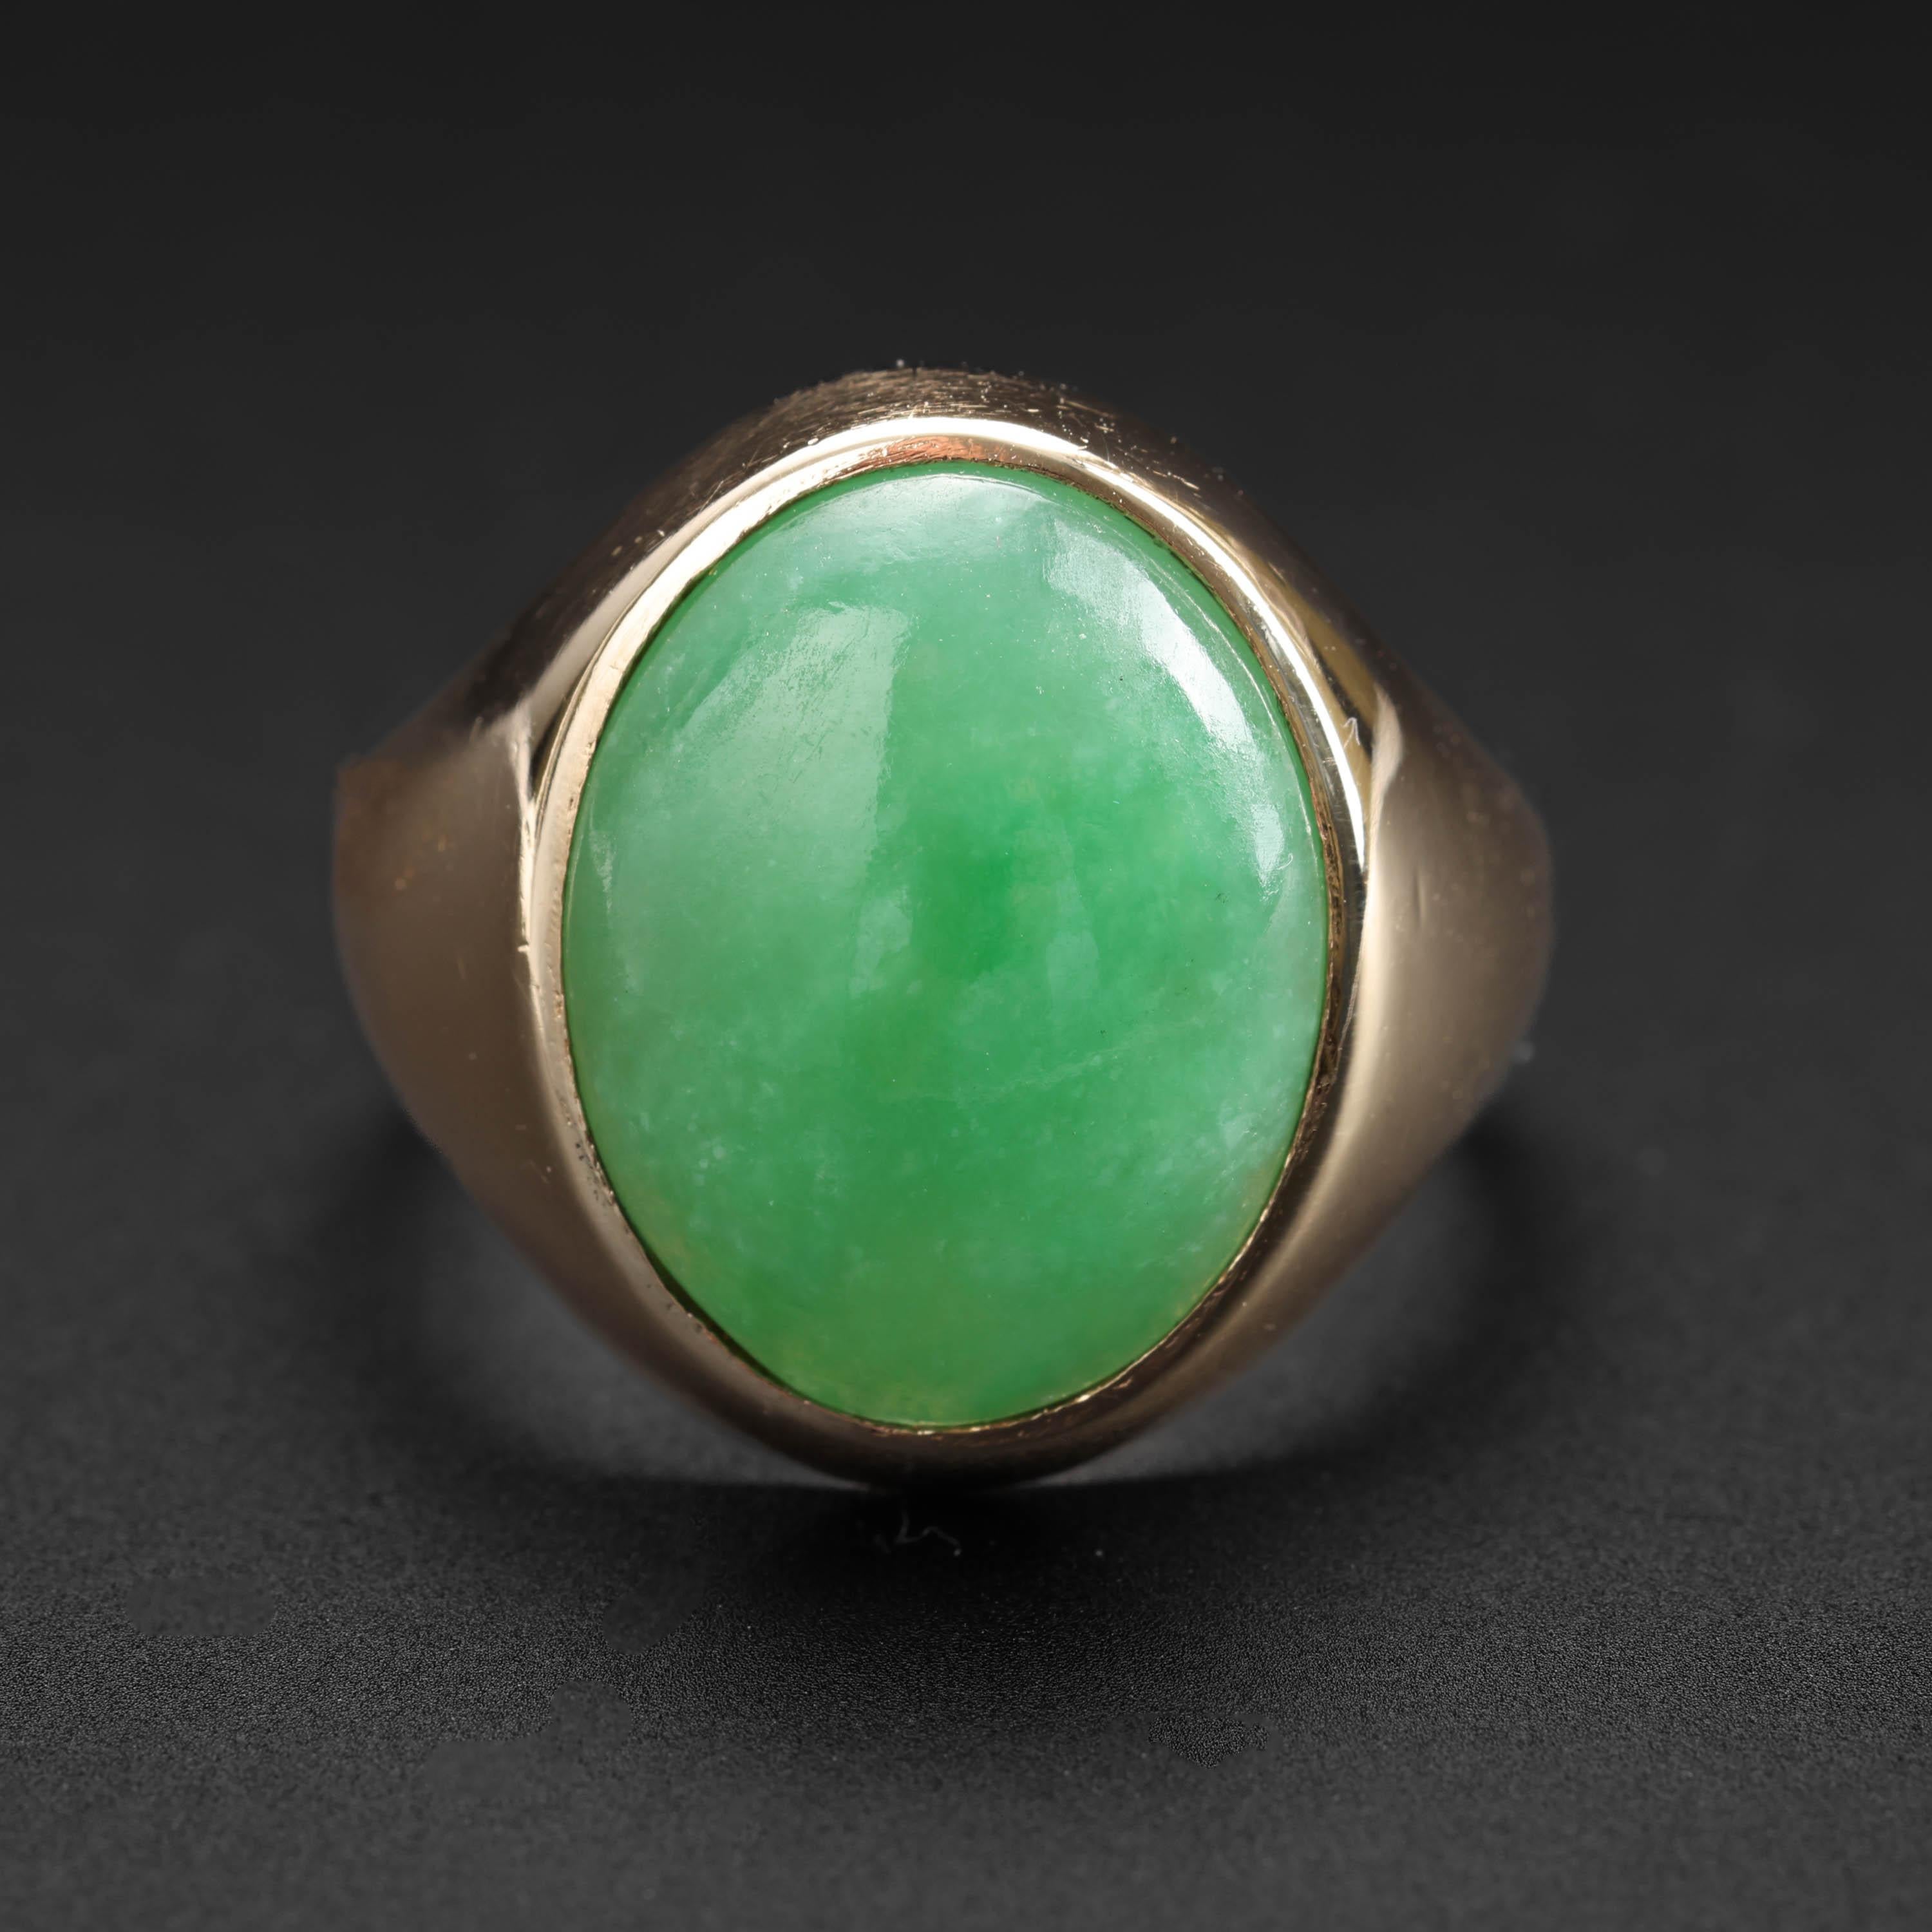 This classic midcentury jade ring features a cabochon of lush, translucent apple green natural and untreated jadeite jade from Burma.  

The sleek 14k yellow gold band is exceedingly comfortable. The 15.18 x 12.4 x 3.91 jade cabochon has an even